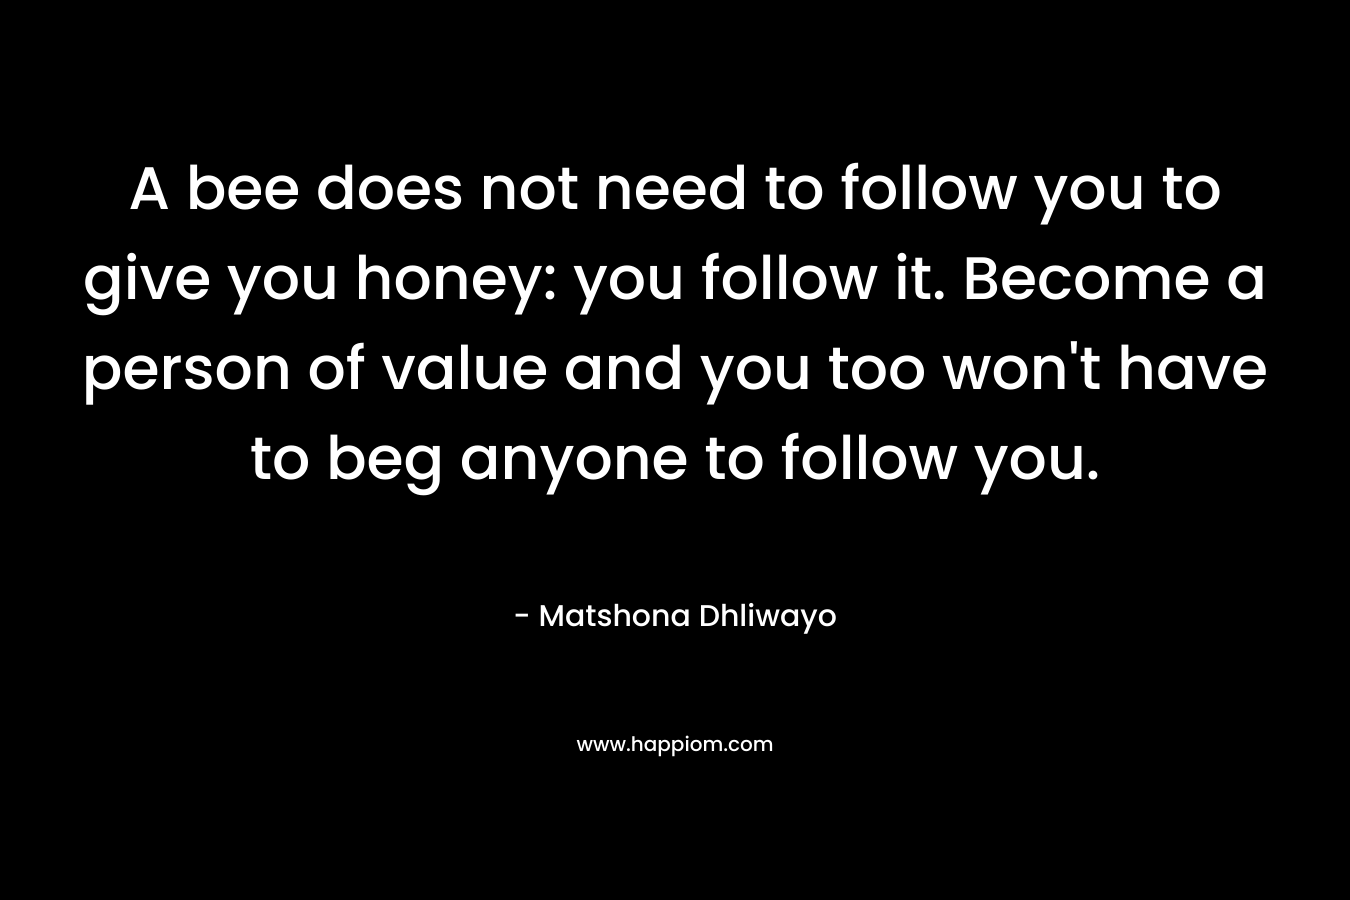 A bee does not need to follow you to give you honey: you follow it. Become a person of value and you too won't have to beg anyone to follow you.